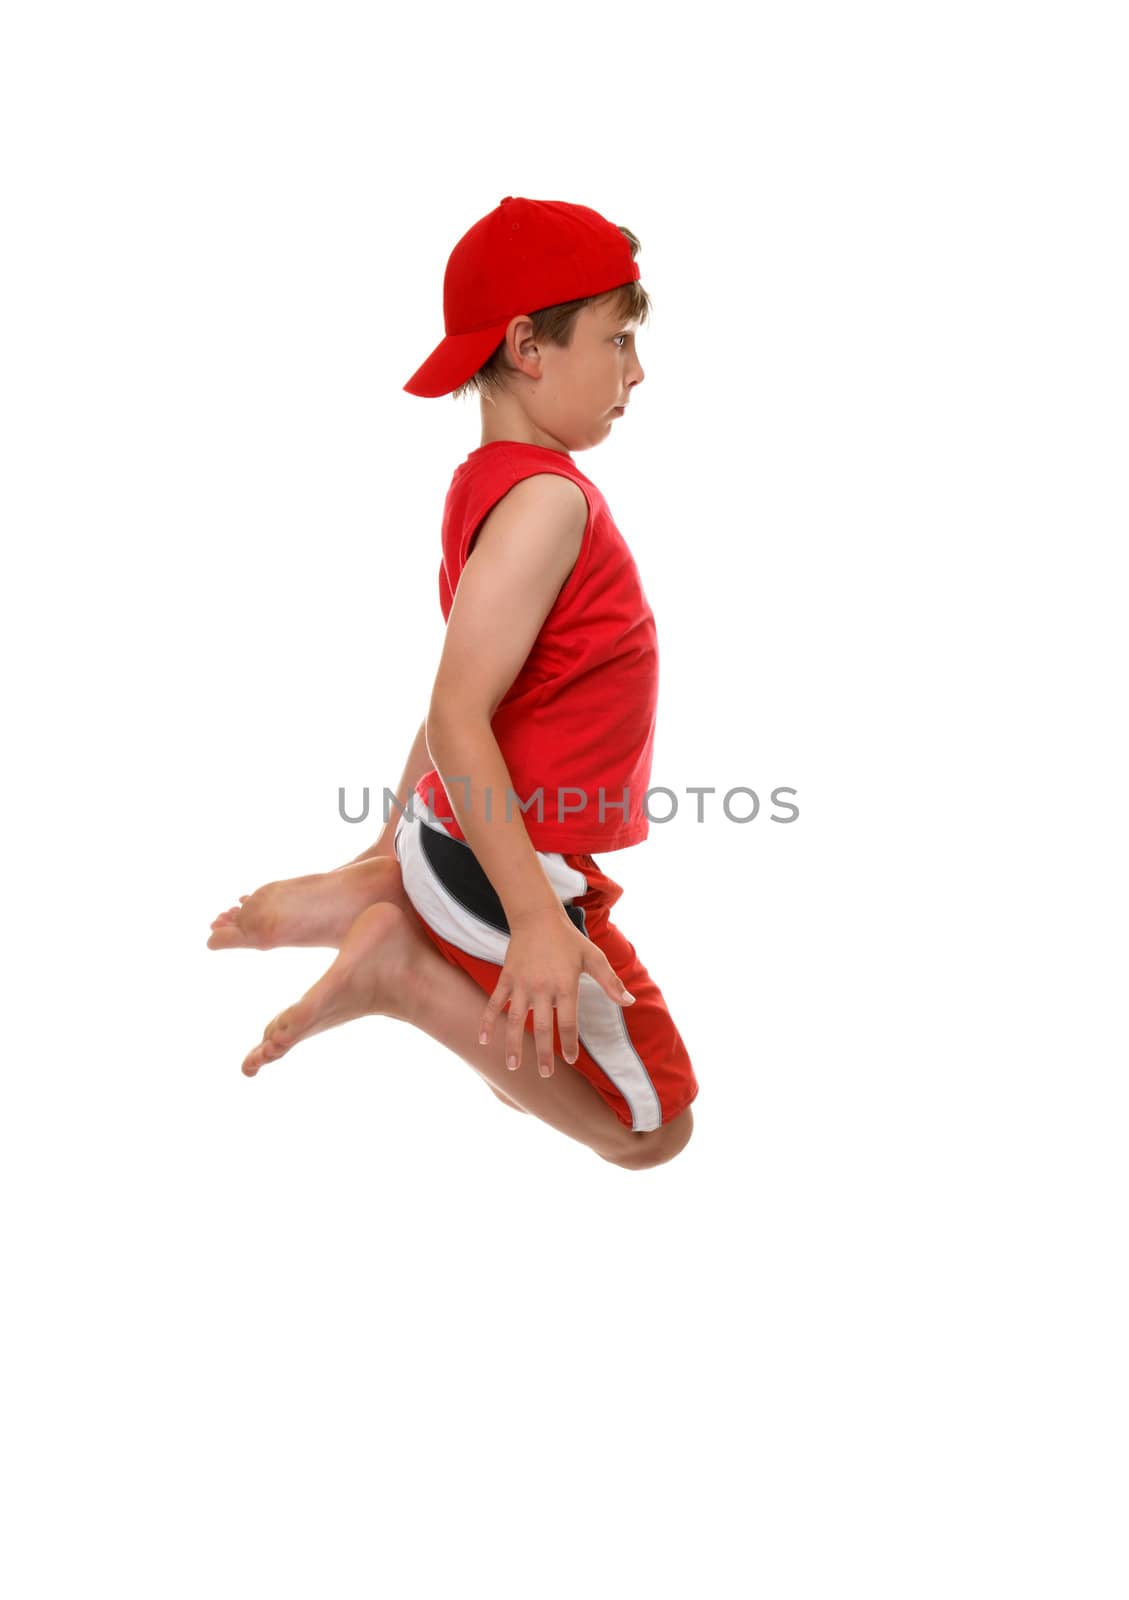 A boy jumps into the air, knees in tight